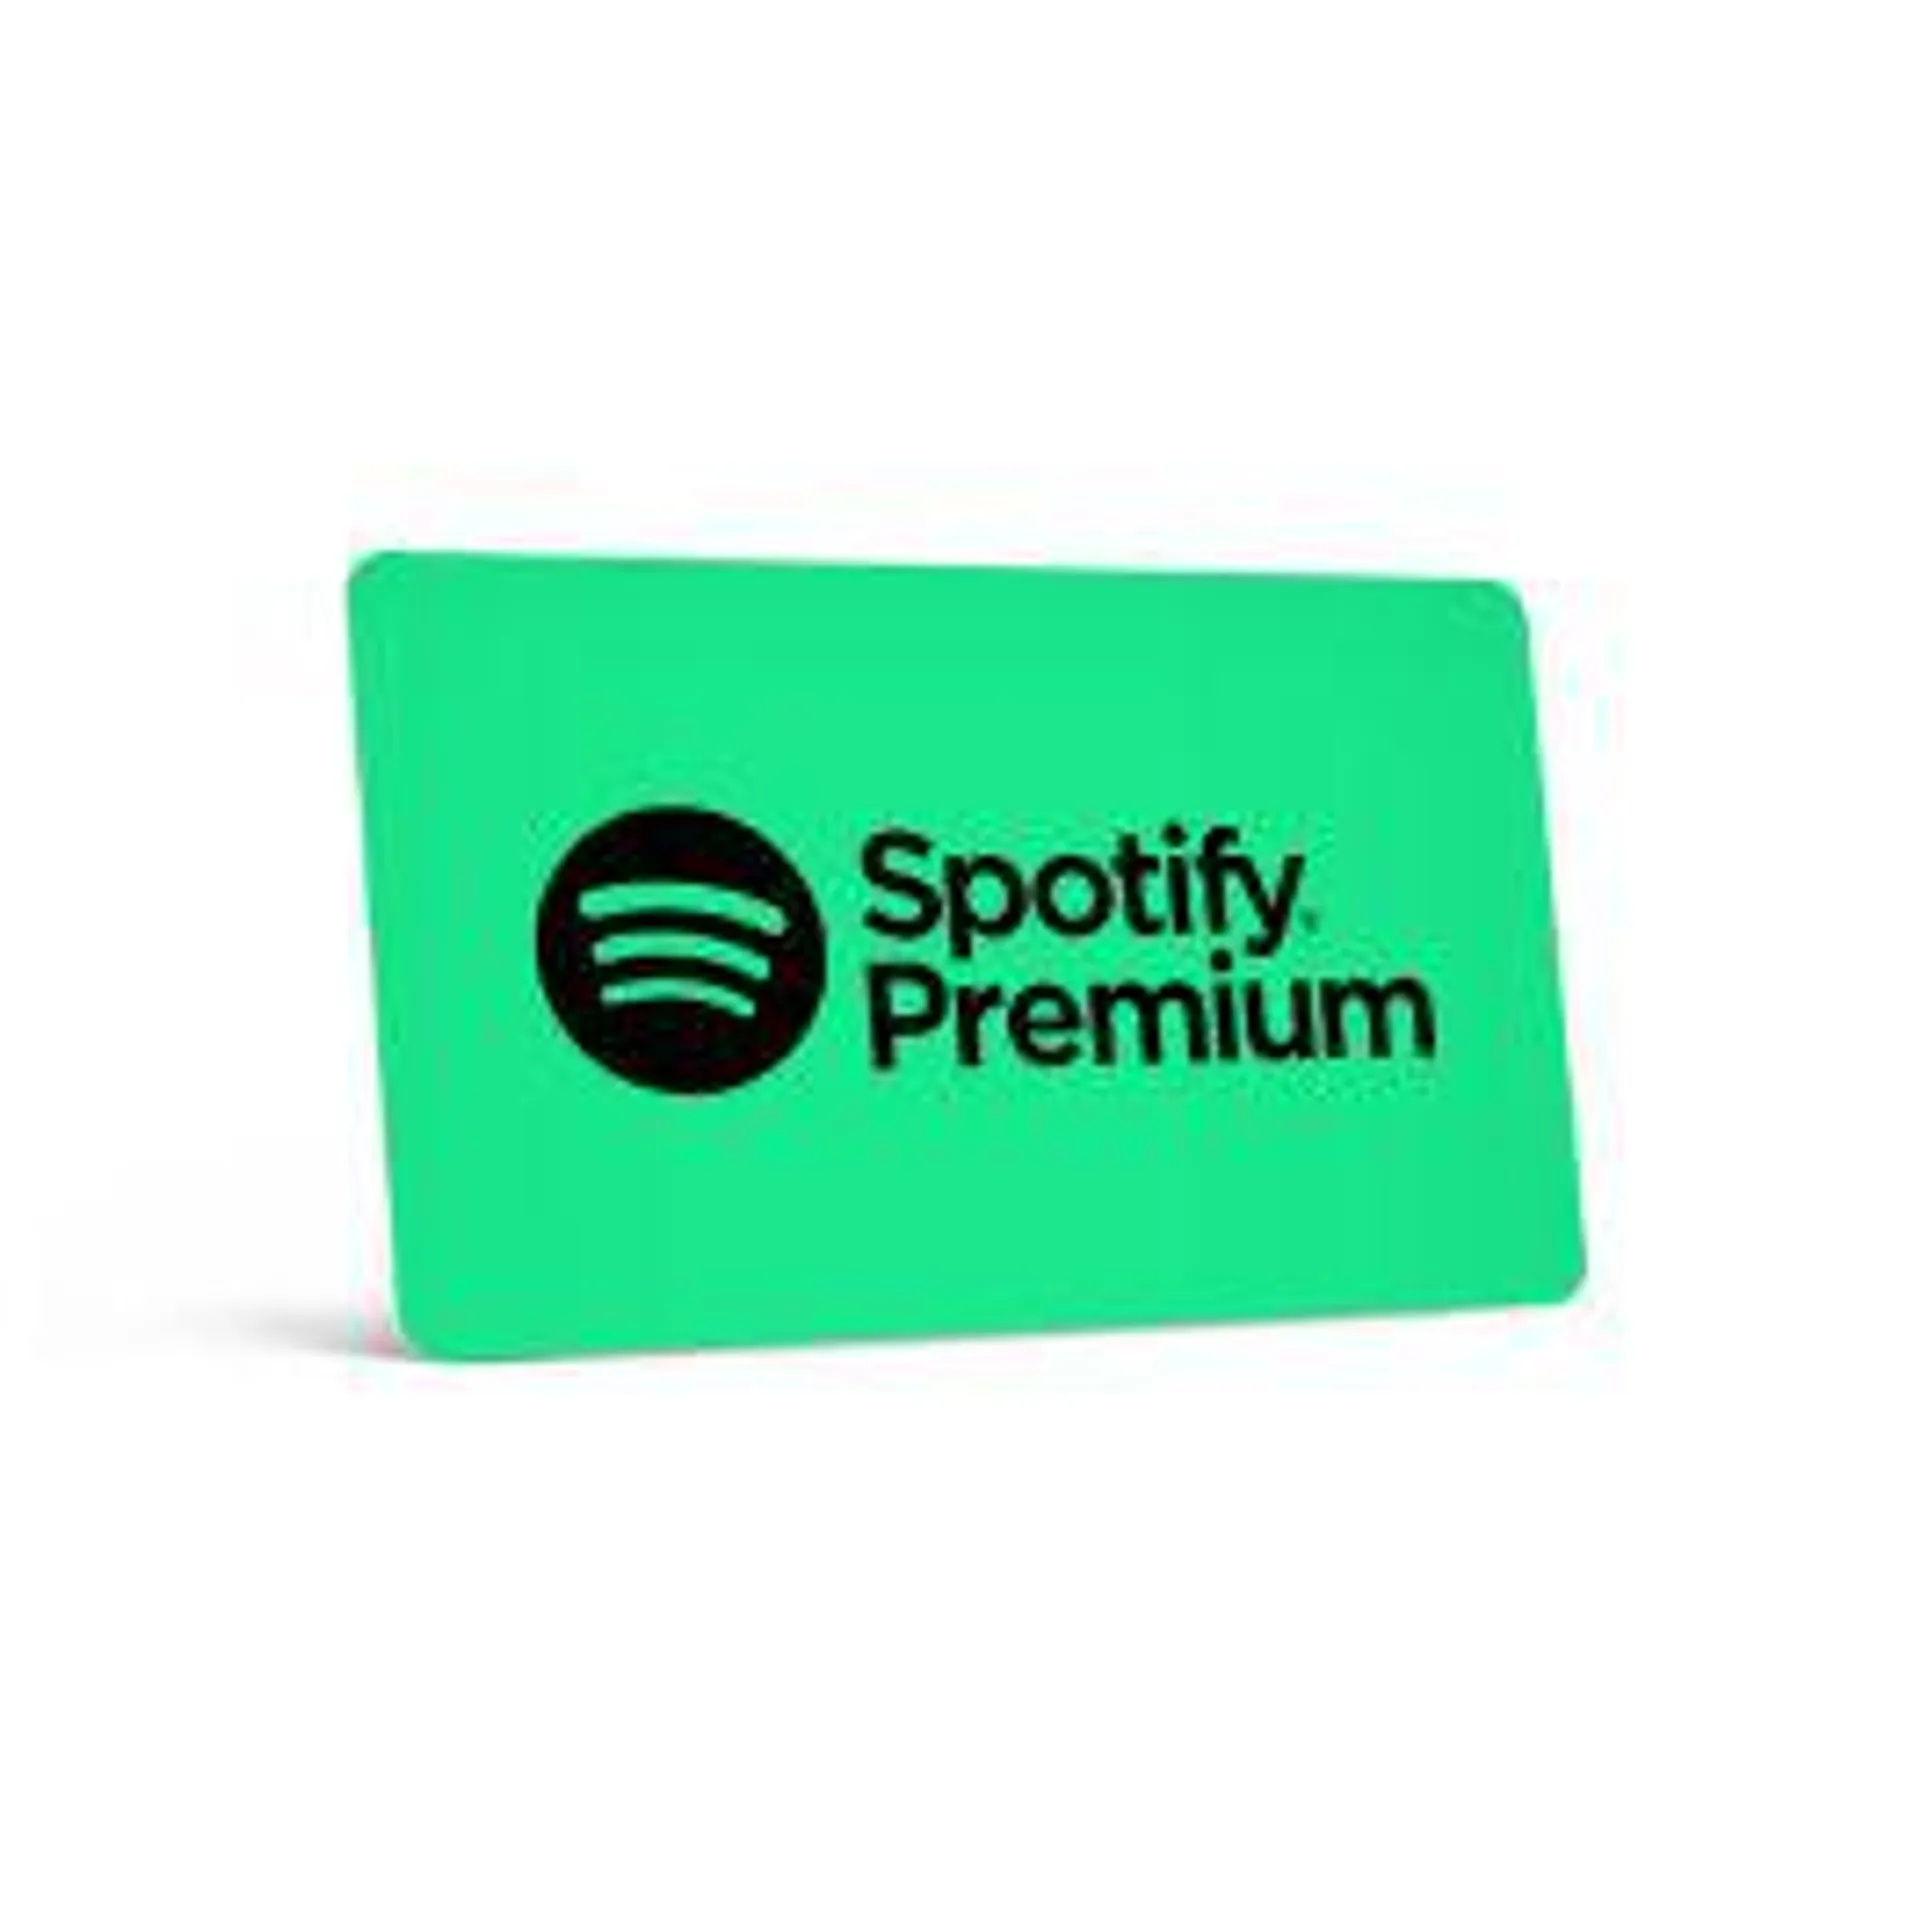 € 60,- Spotify Gift Card